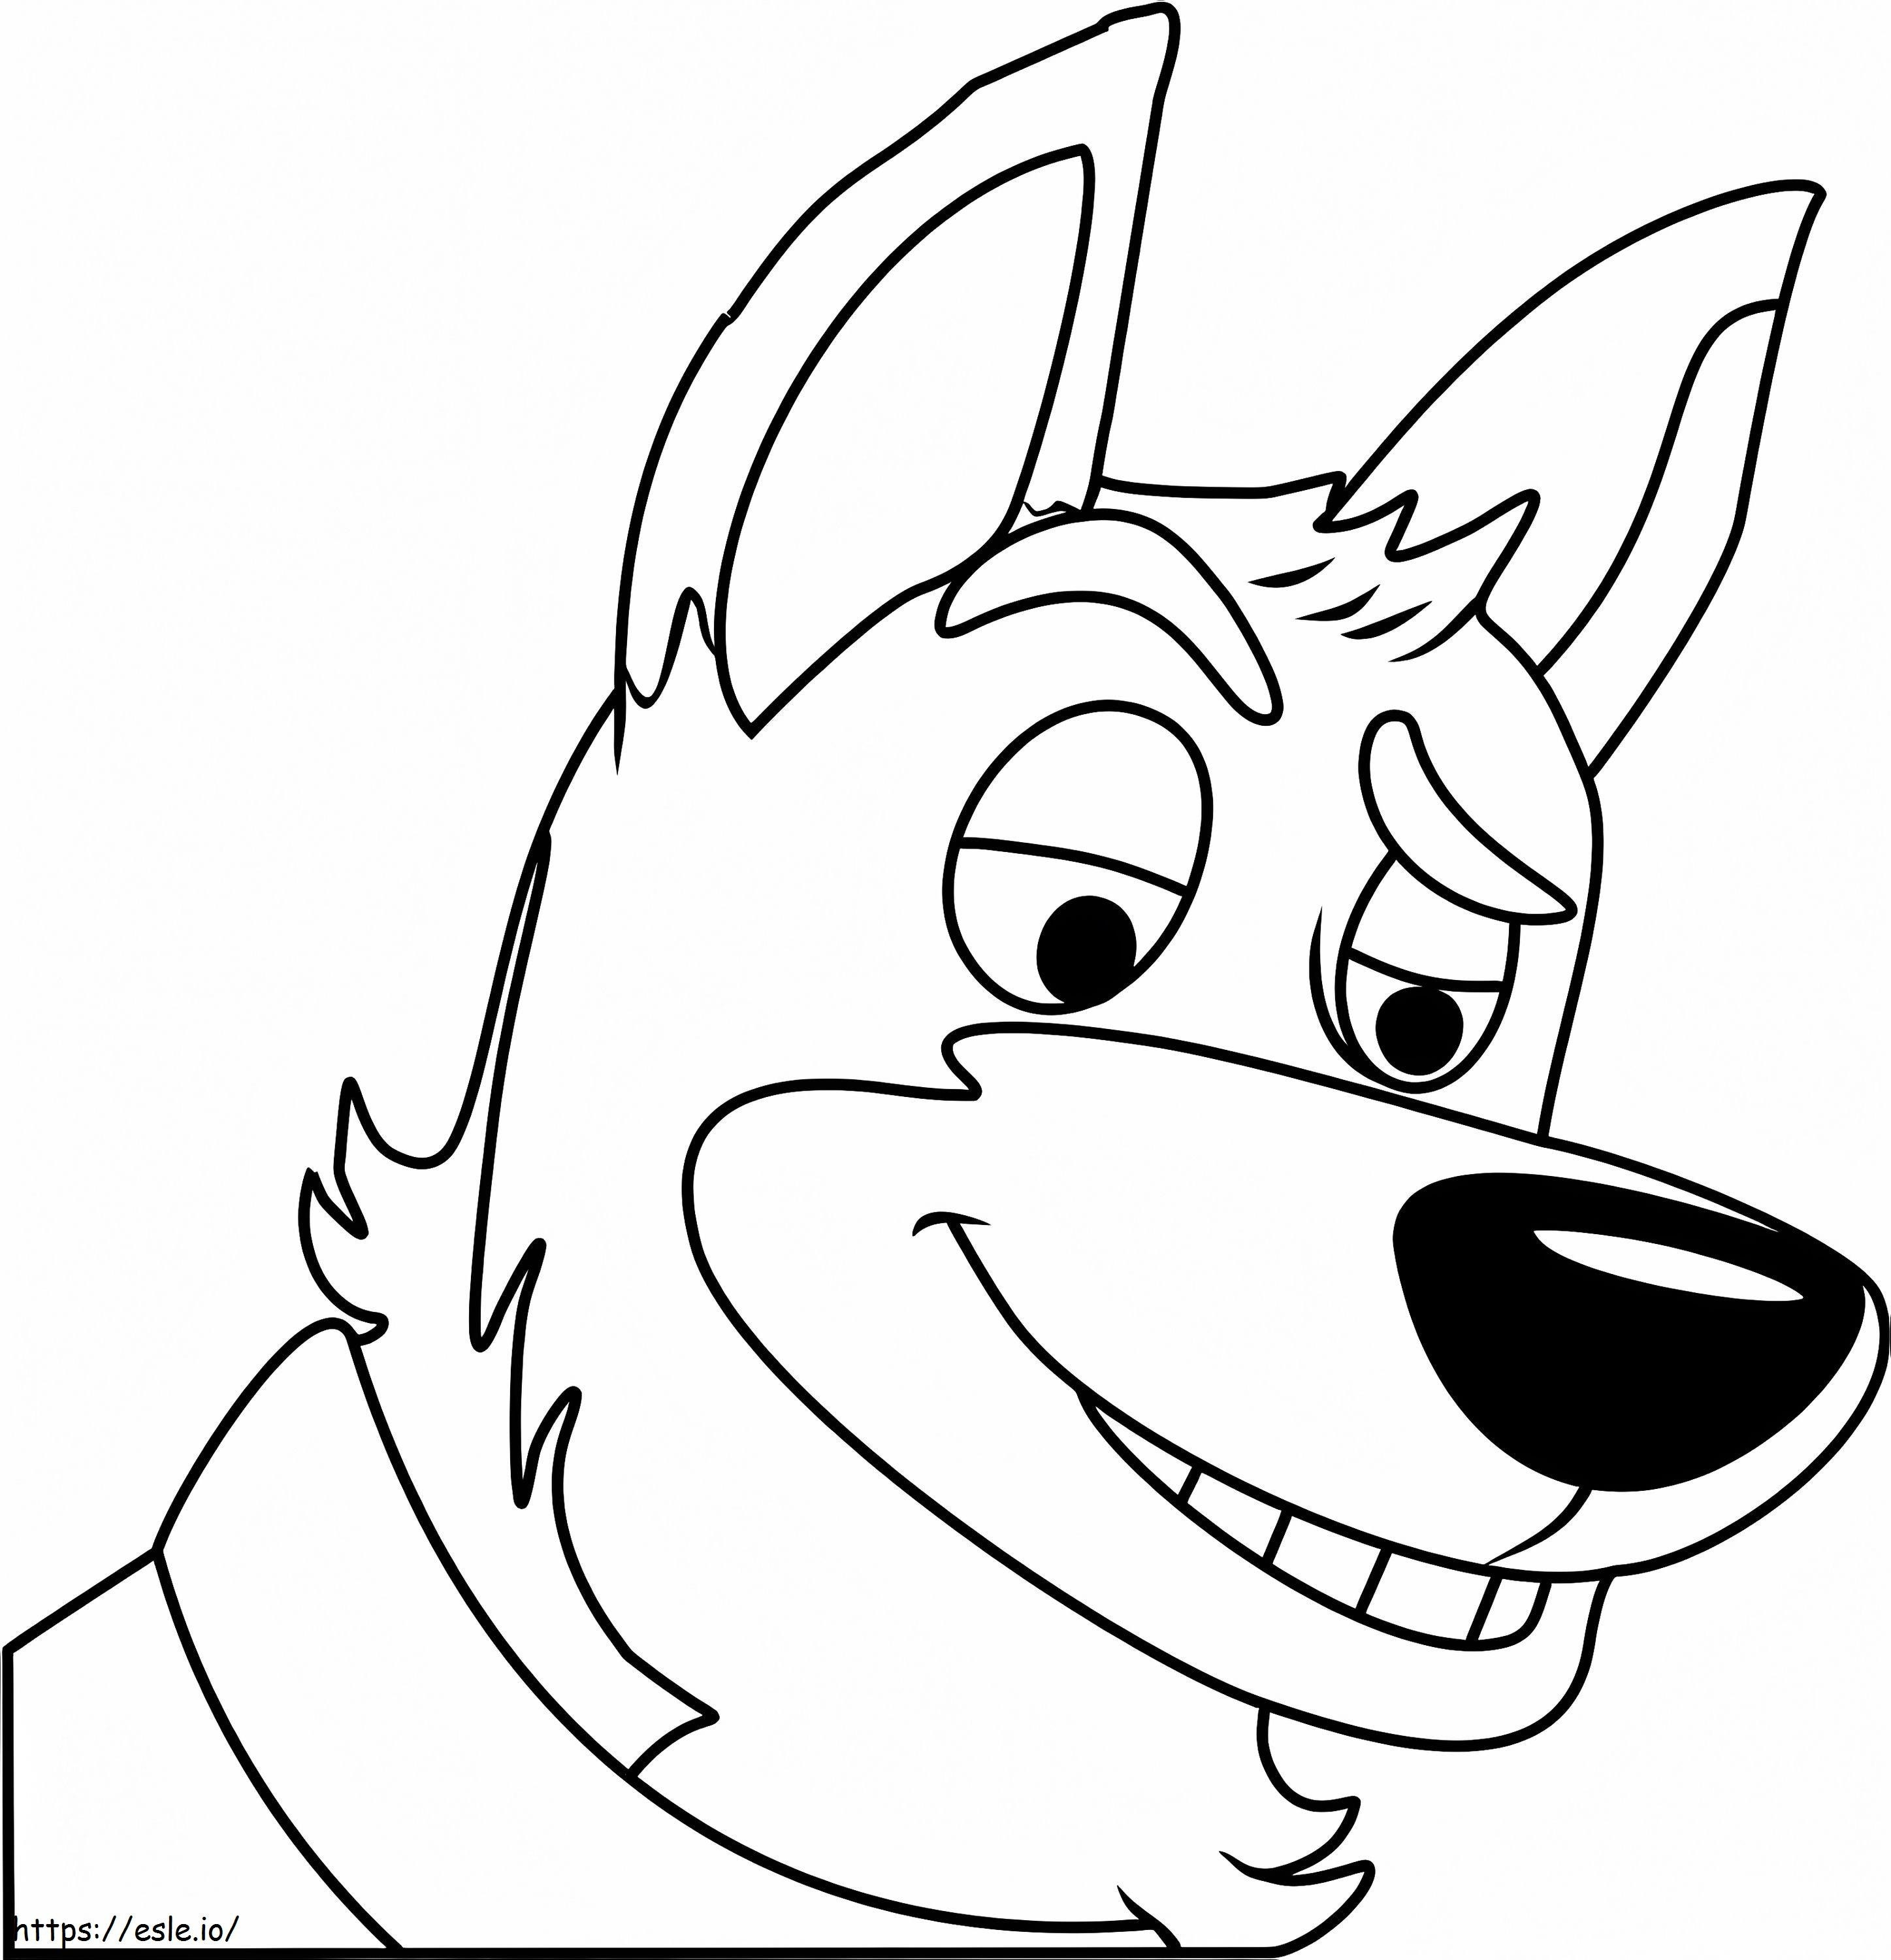 Sarge From Pound Puppies coloring page